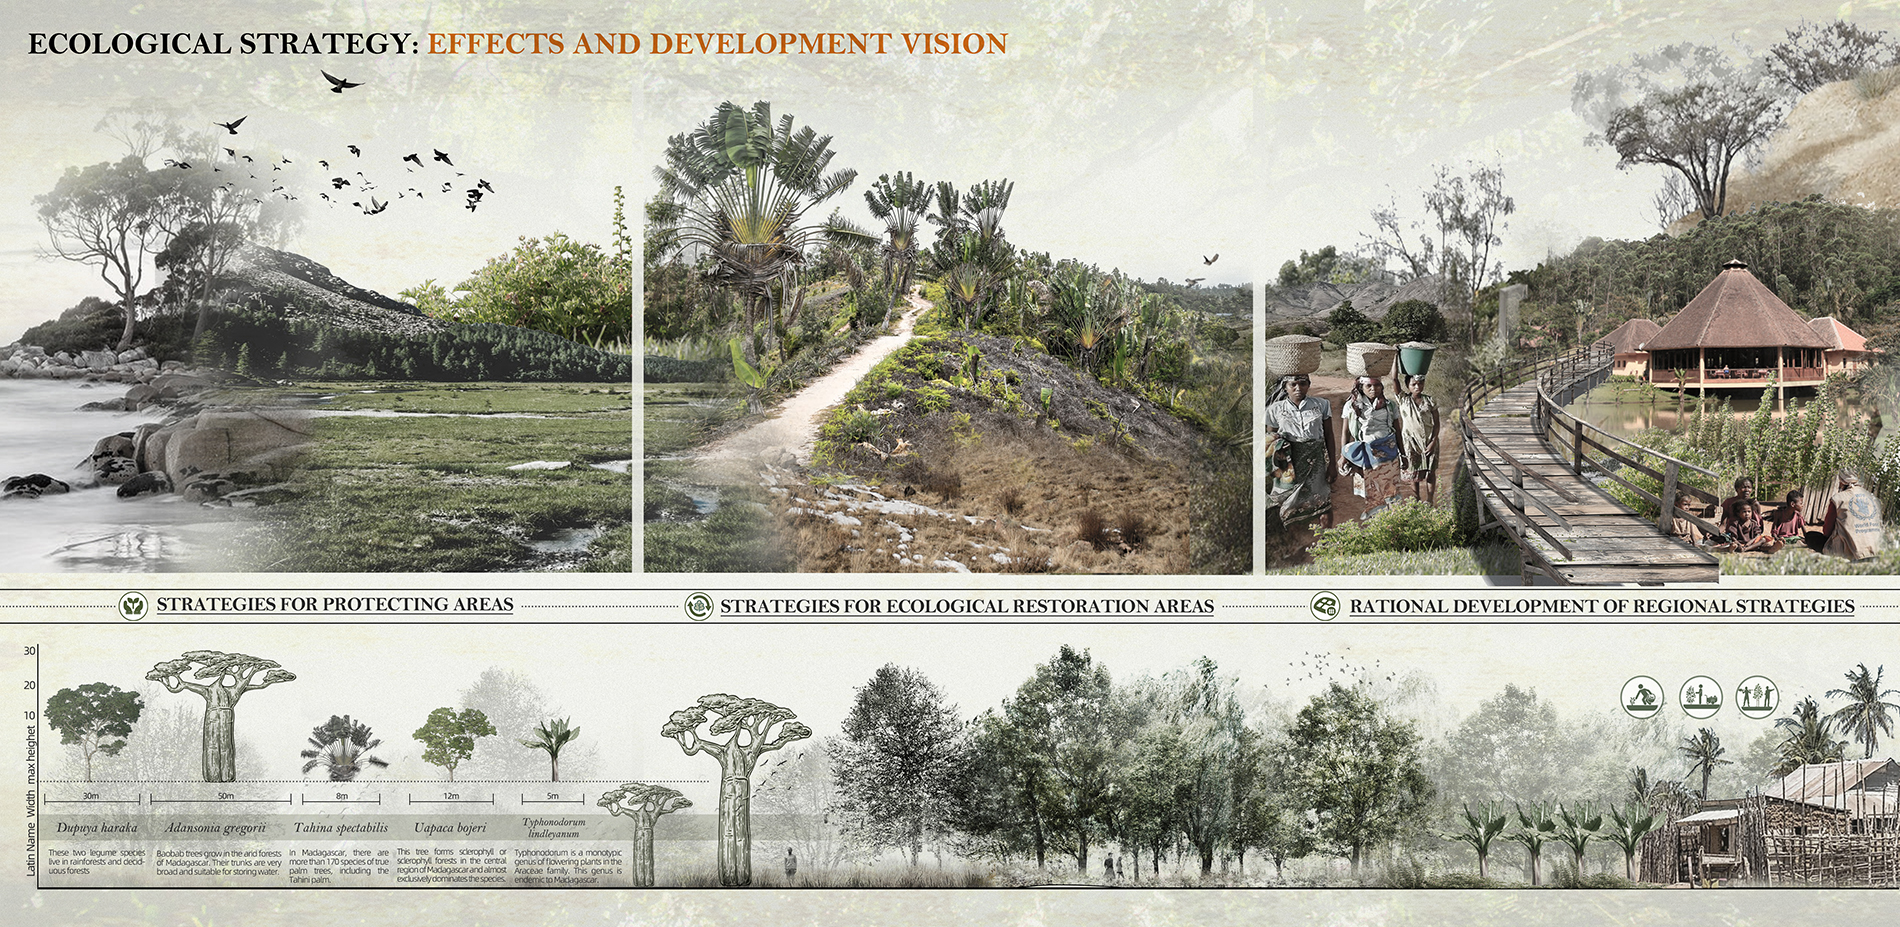 Ecological Strategy: Effects and Development Vision